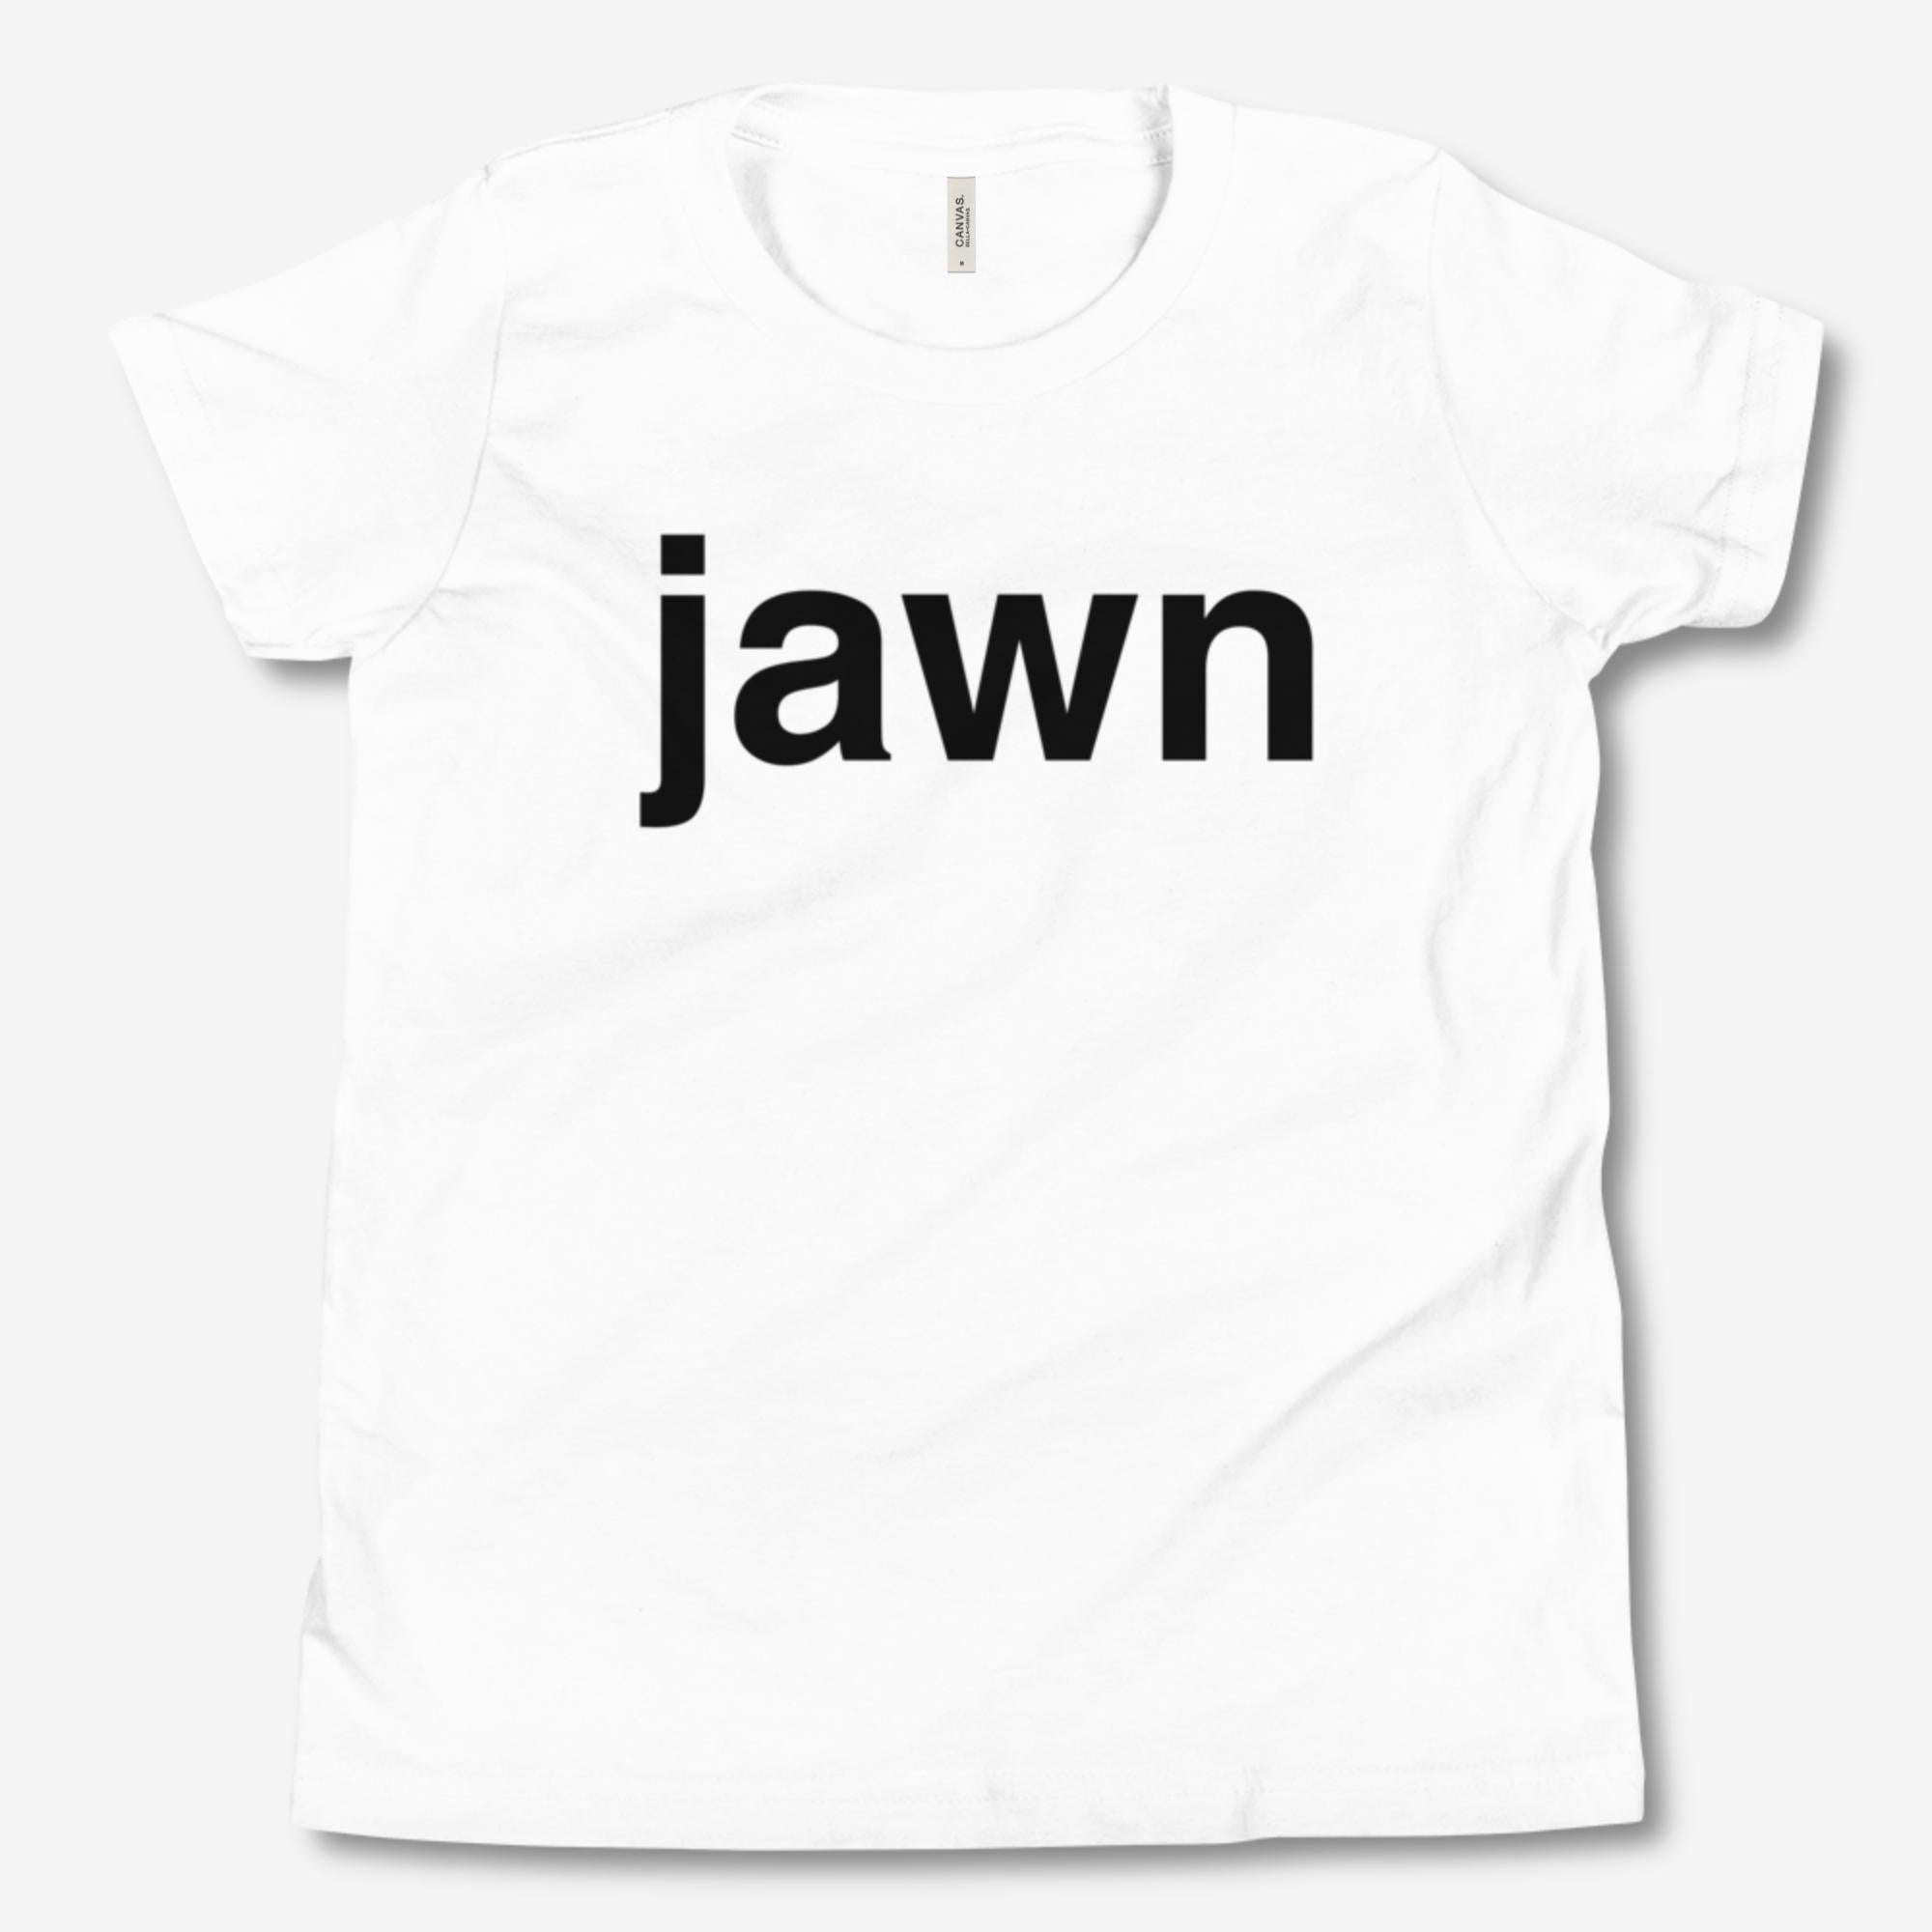 "Helvetica Jawn" Youth Tee